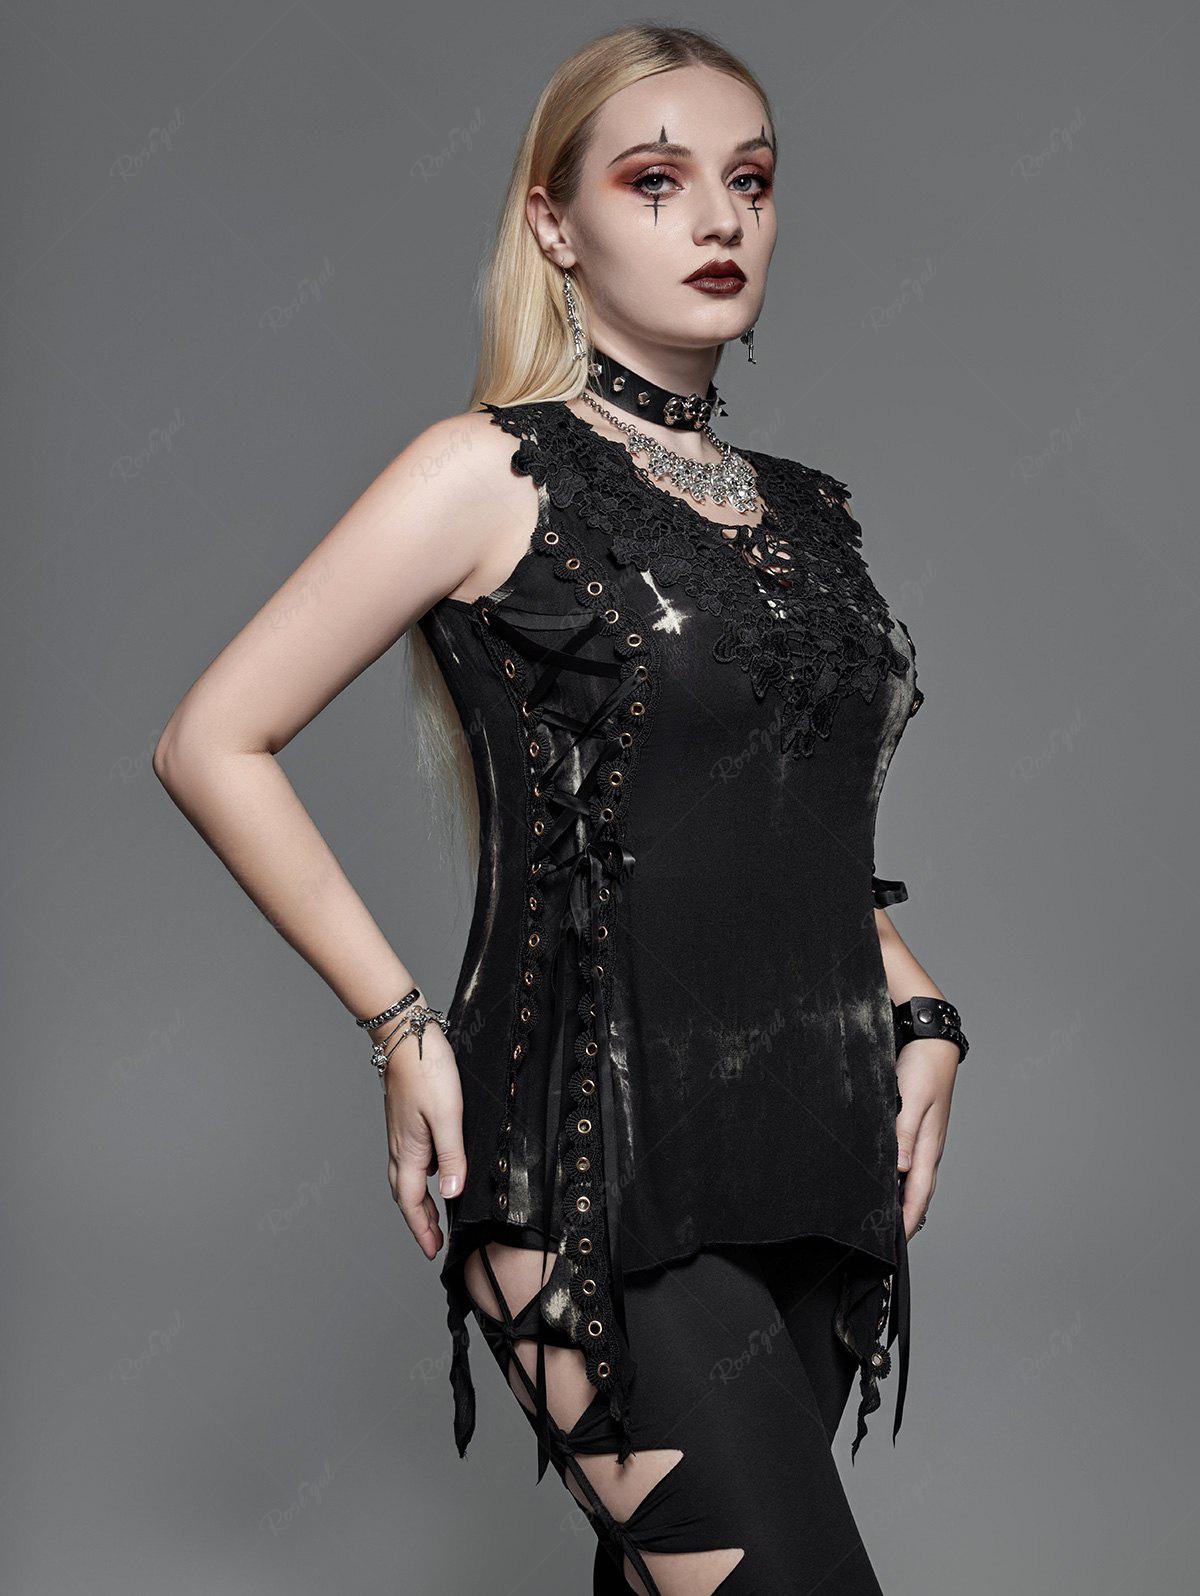 Gothic Grommet Flower Hollow Out Lace Up Sleeveless Top